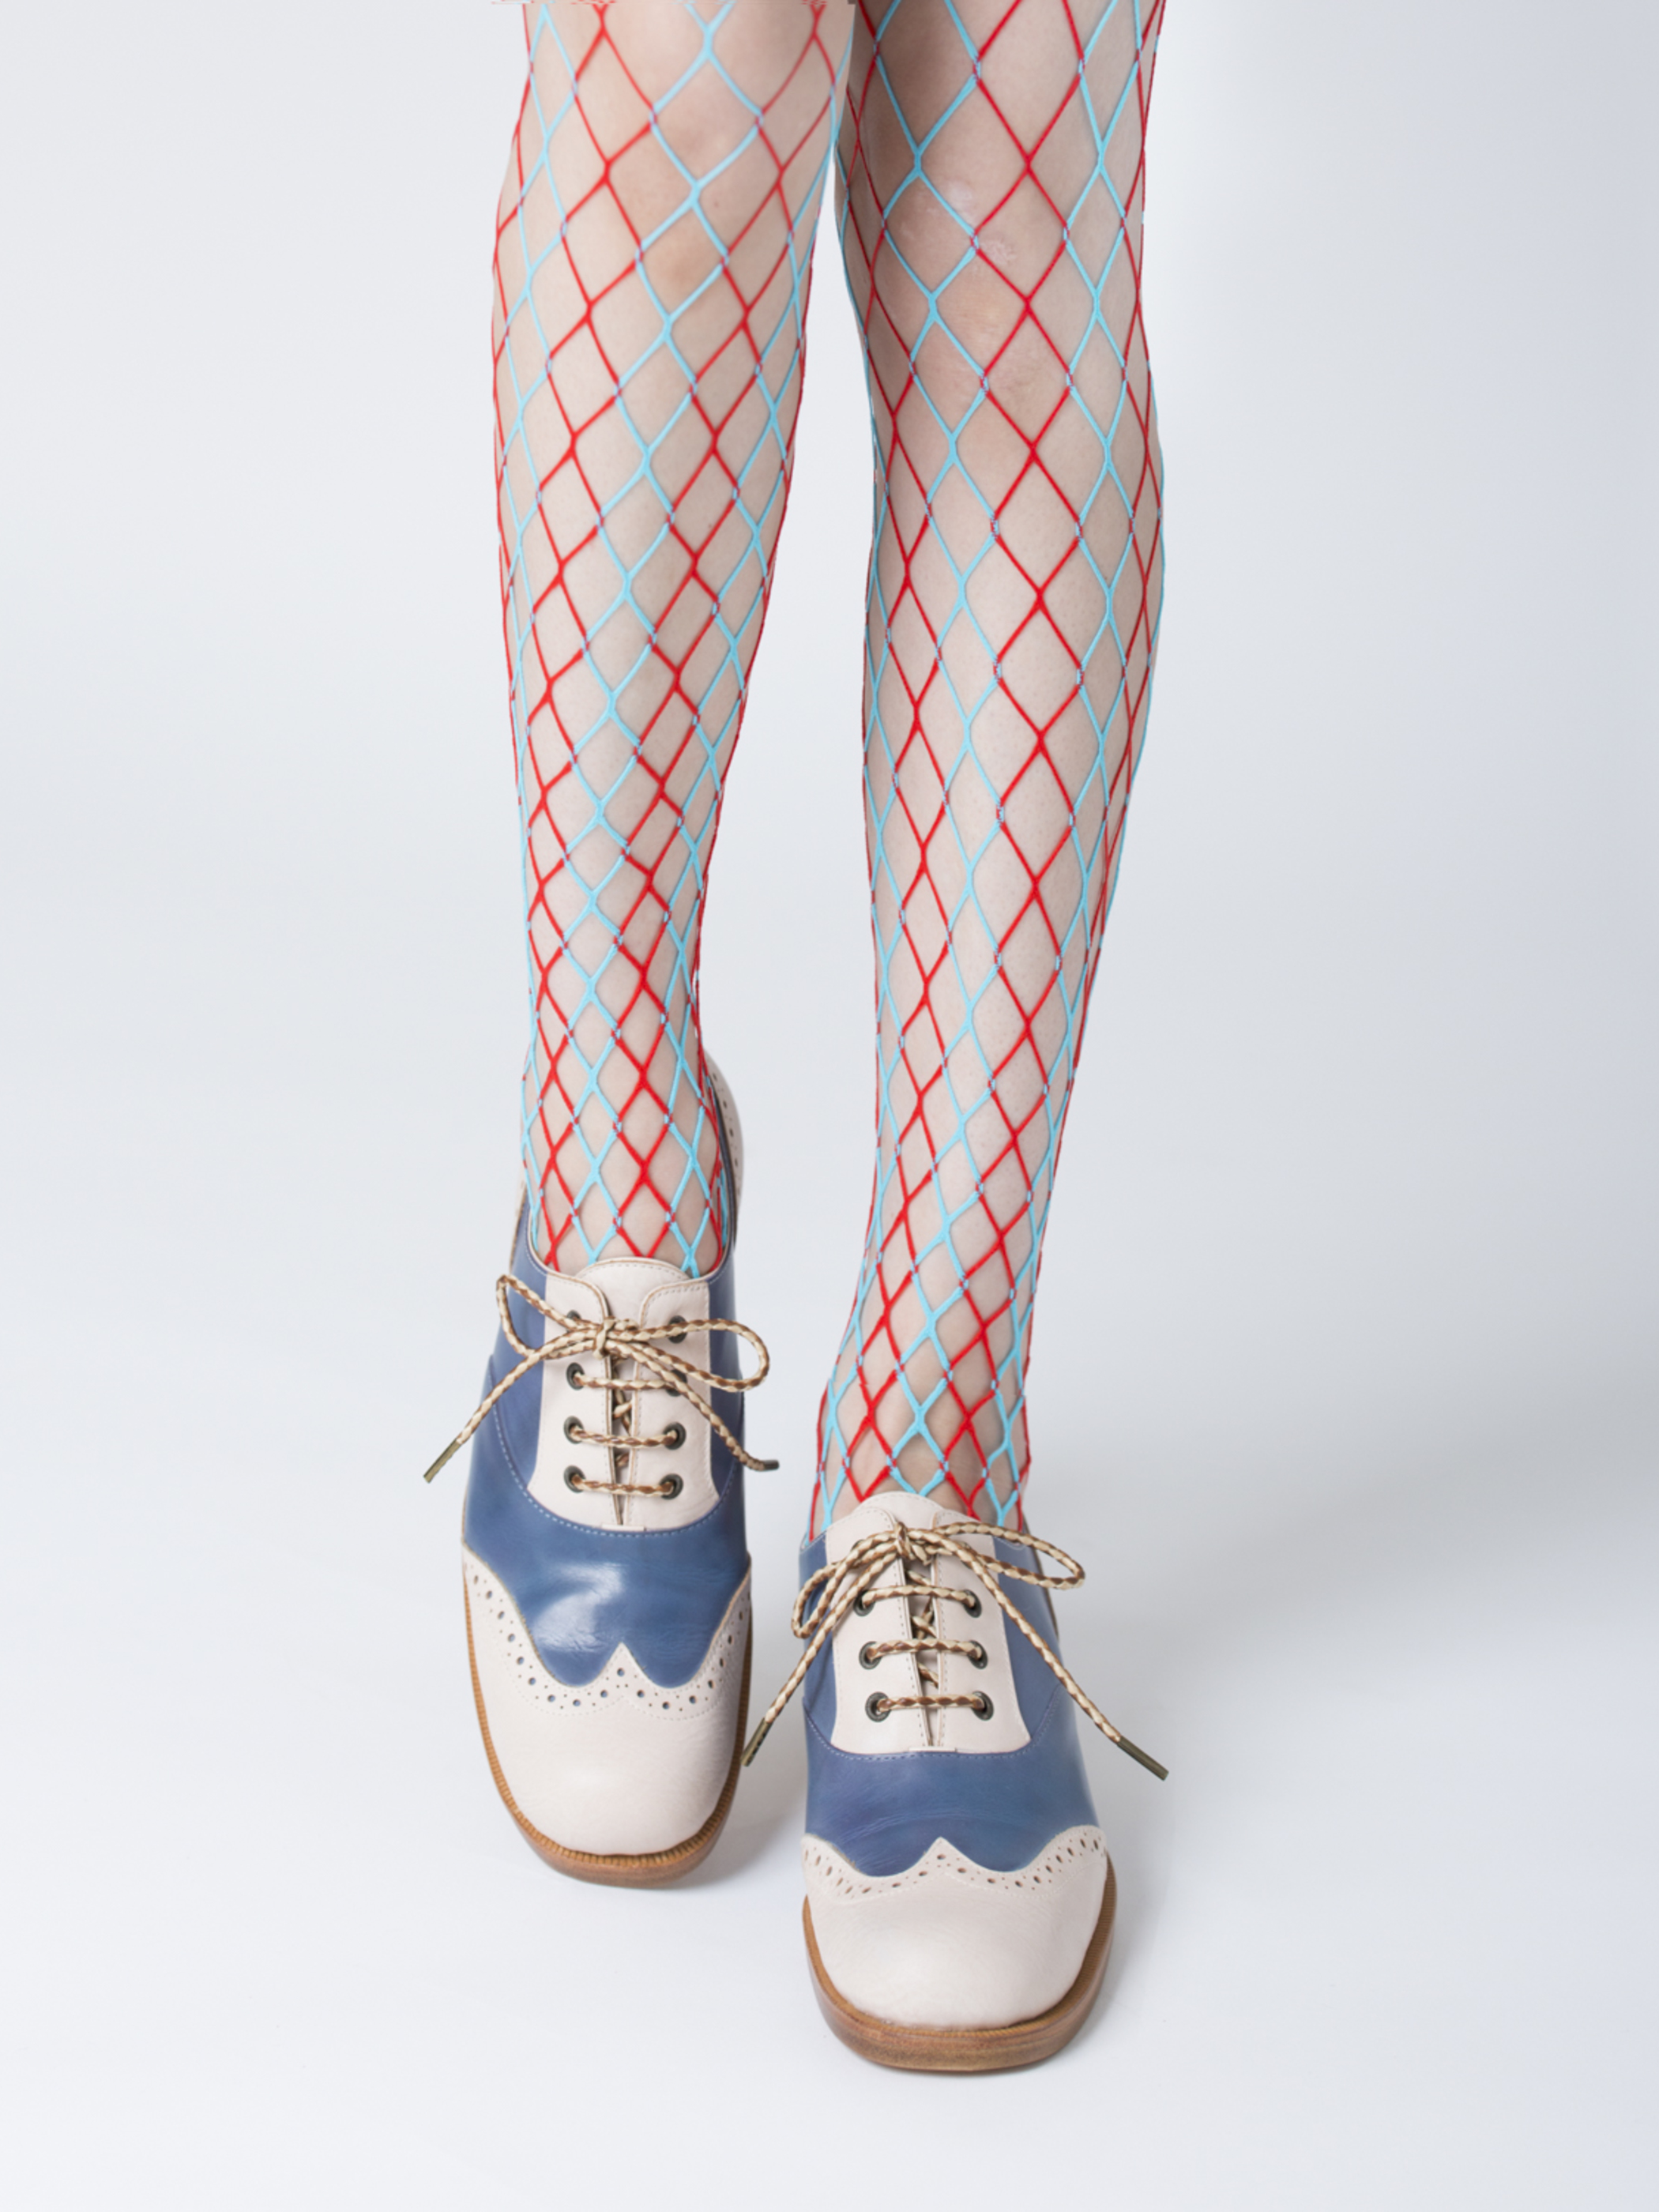 VERO TWIQO / Fishnet tights 　　TURQUOISE×RED